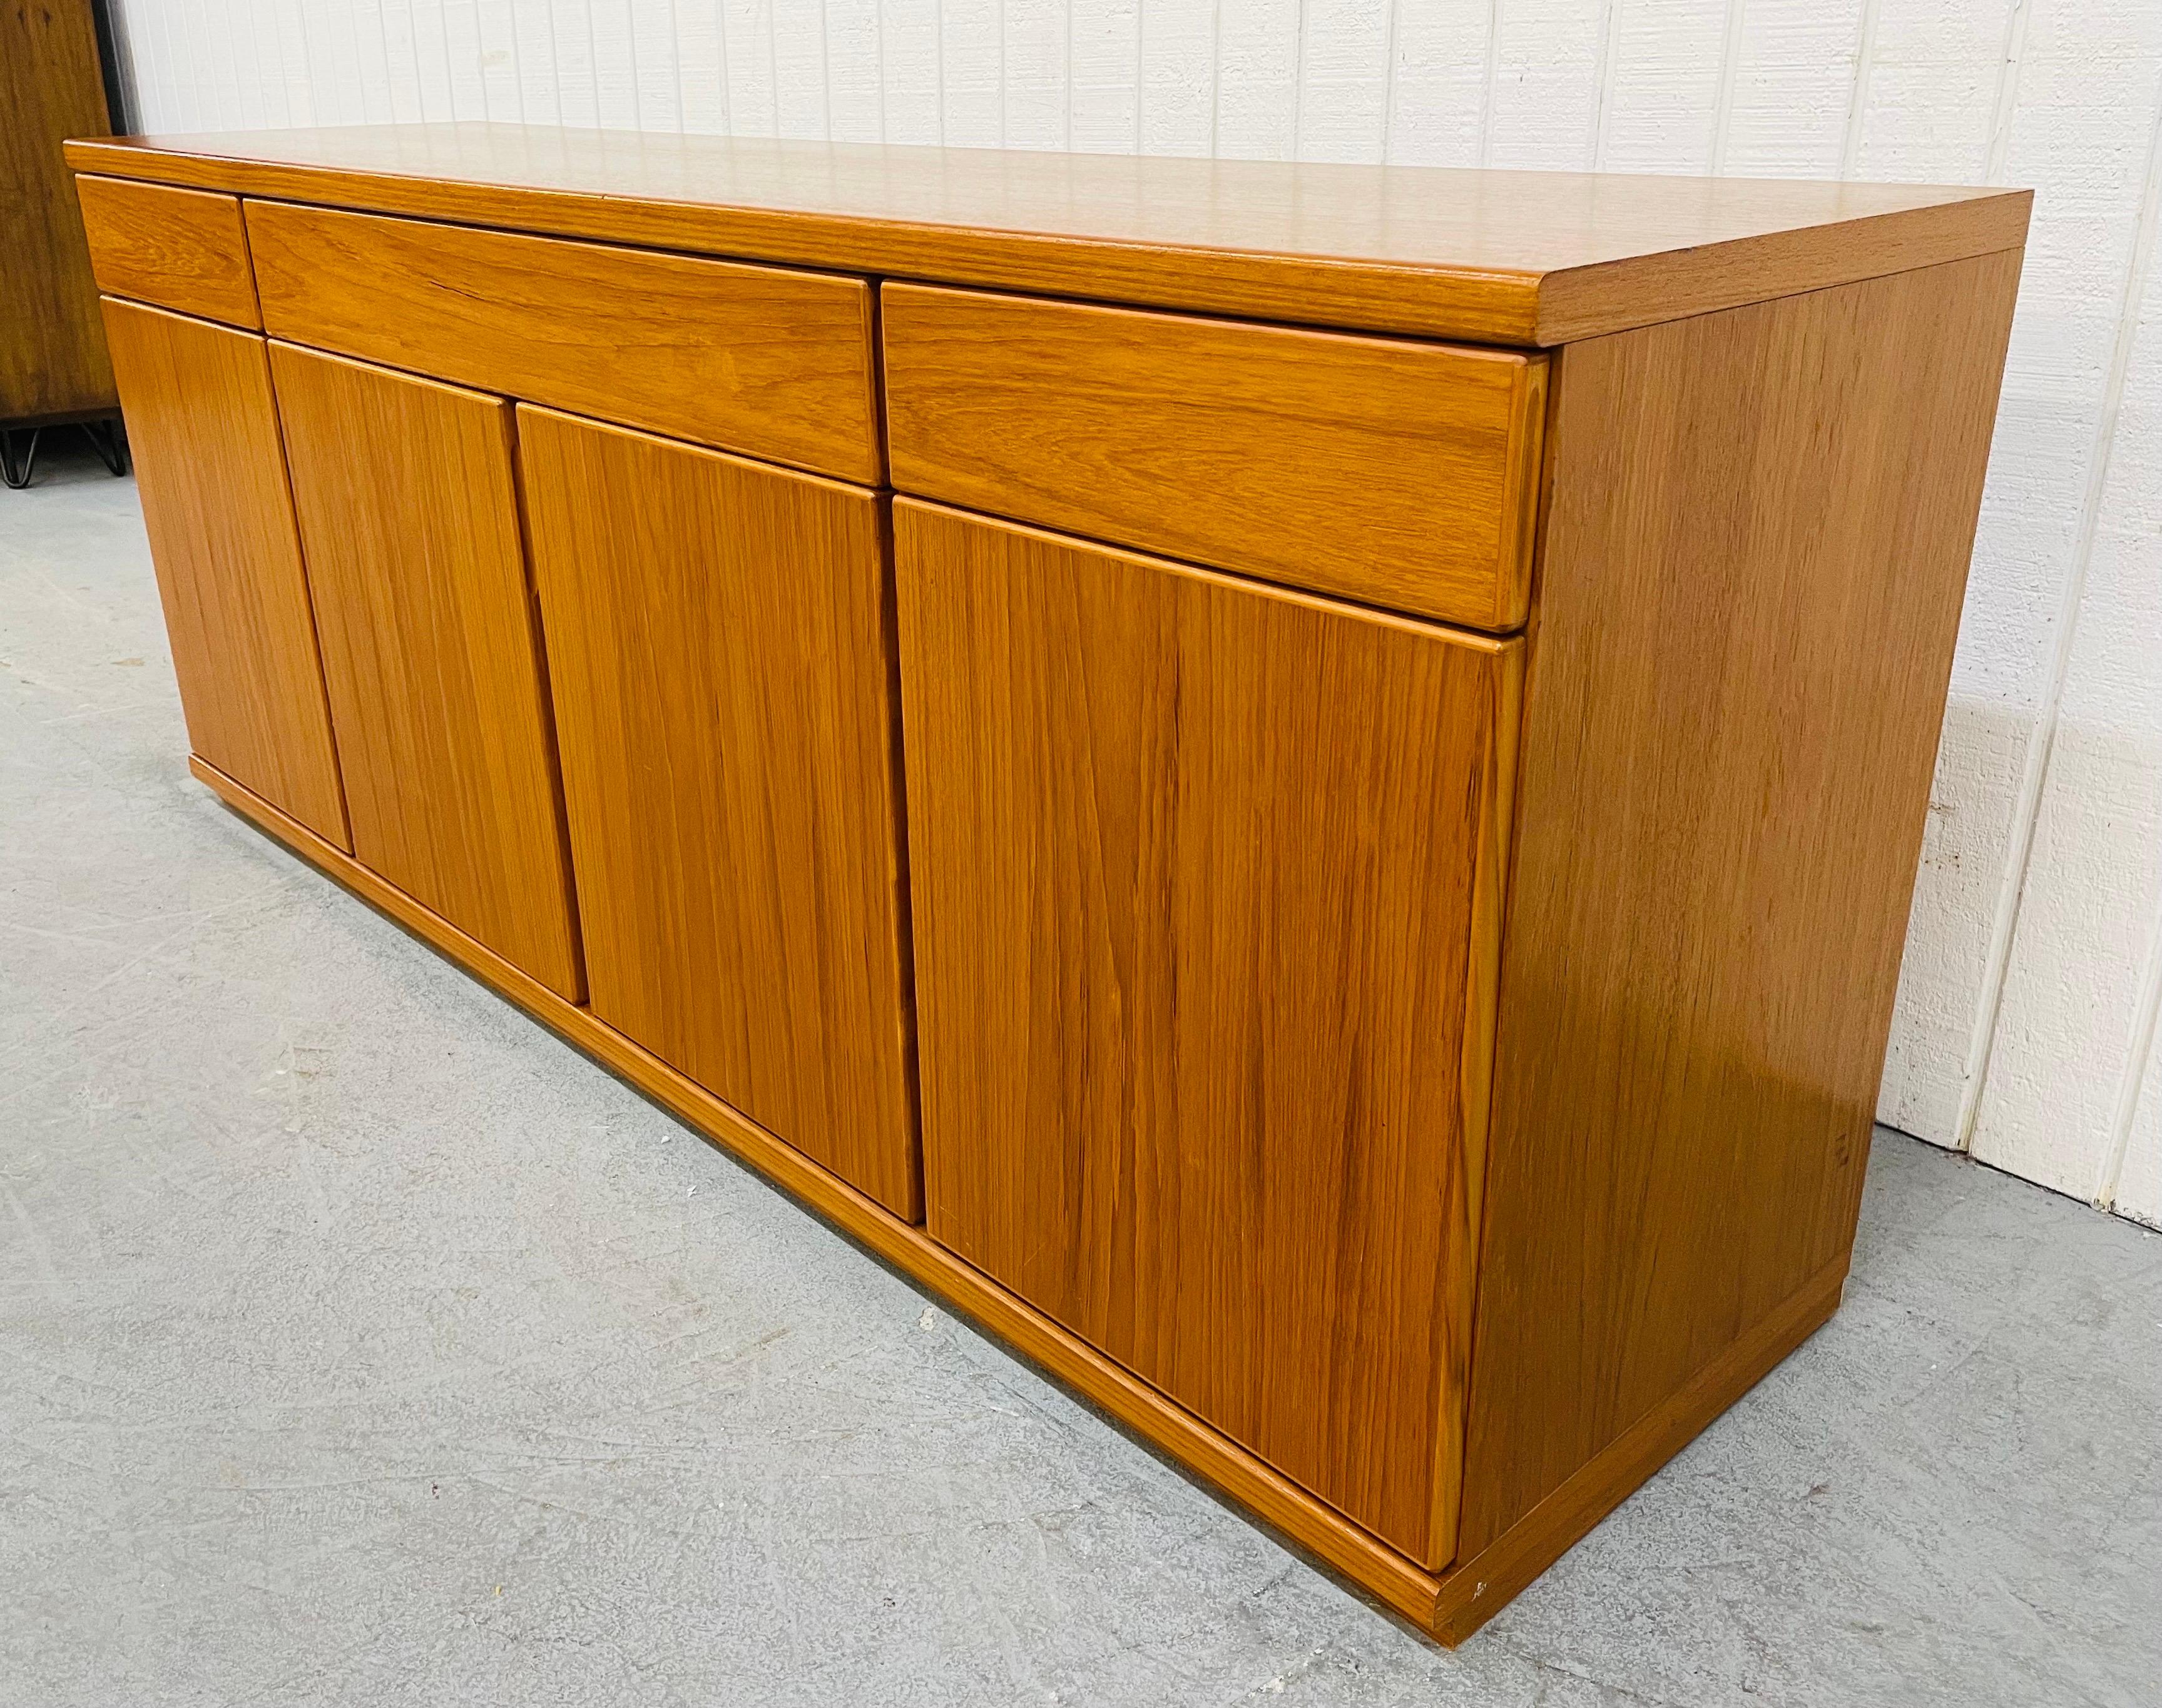 This listing is for a vintage Danish Modern teak sideboard. Featuring a beautiful rectangular teak top, three drawers for storage, two doors on each end that open up to a shelf, and two doors that open up in the center to a shelf.